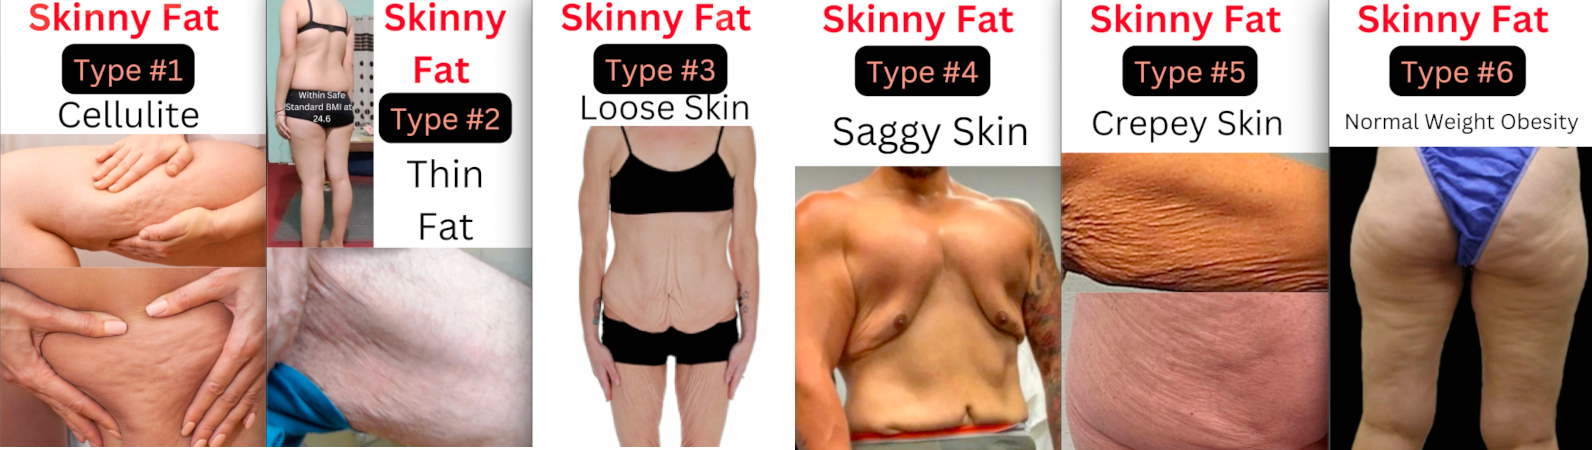 What is Skinny Fat - Scientific/Medical Definition of Skinny Fat